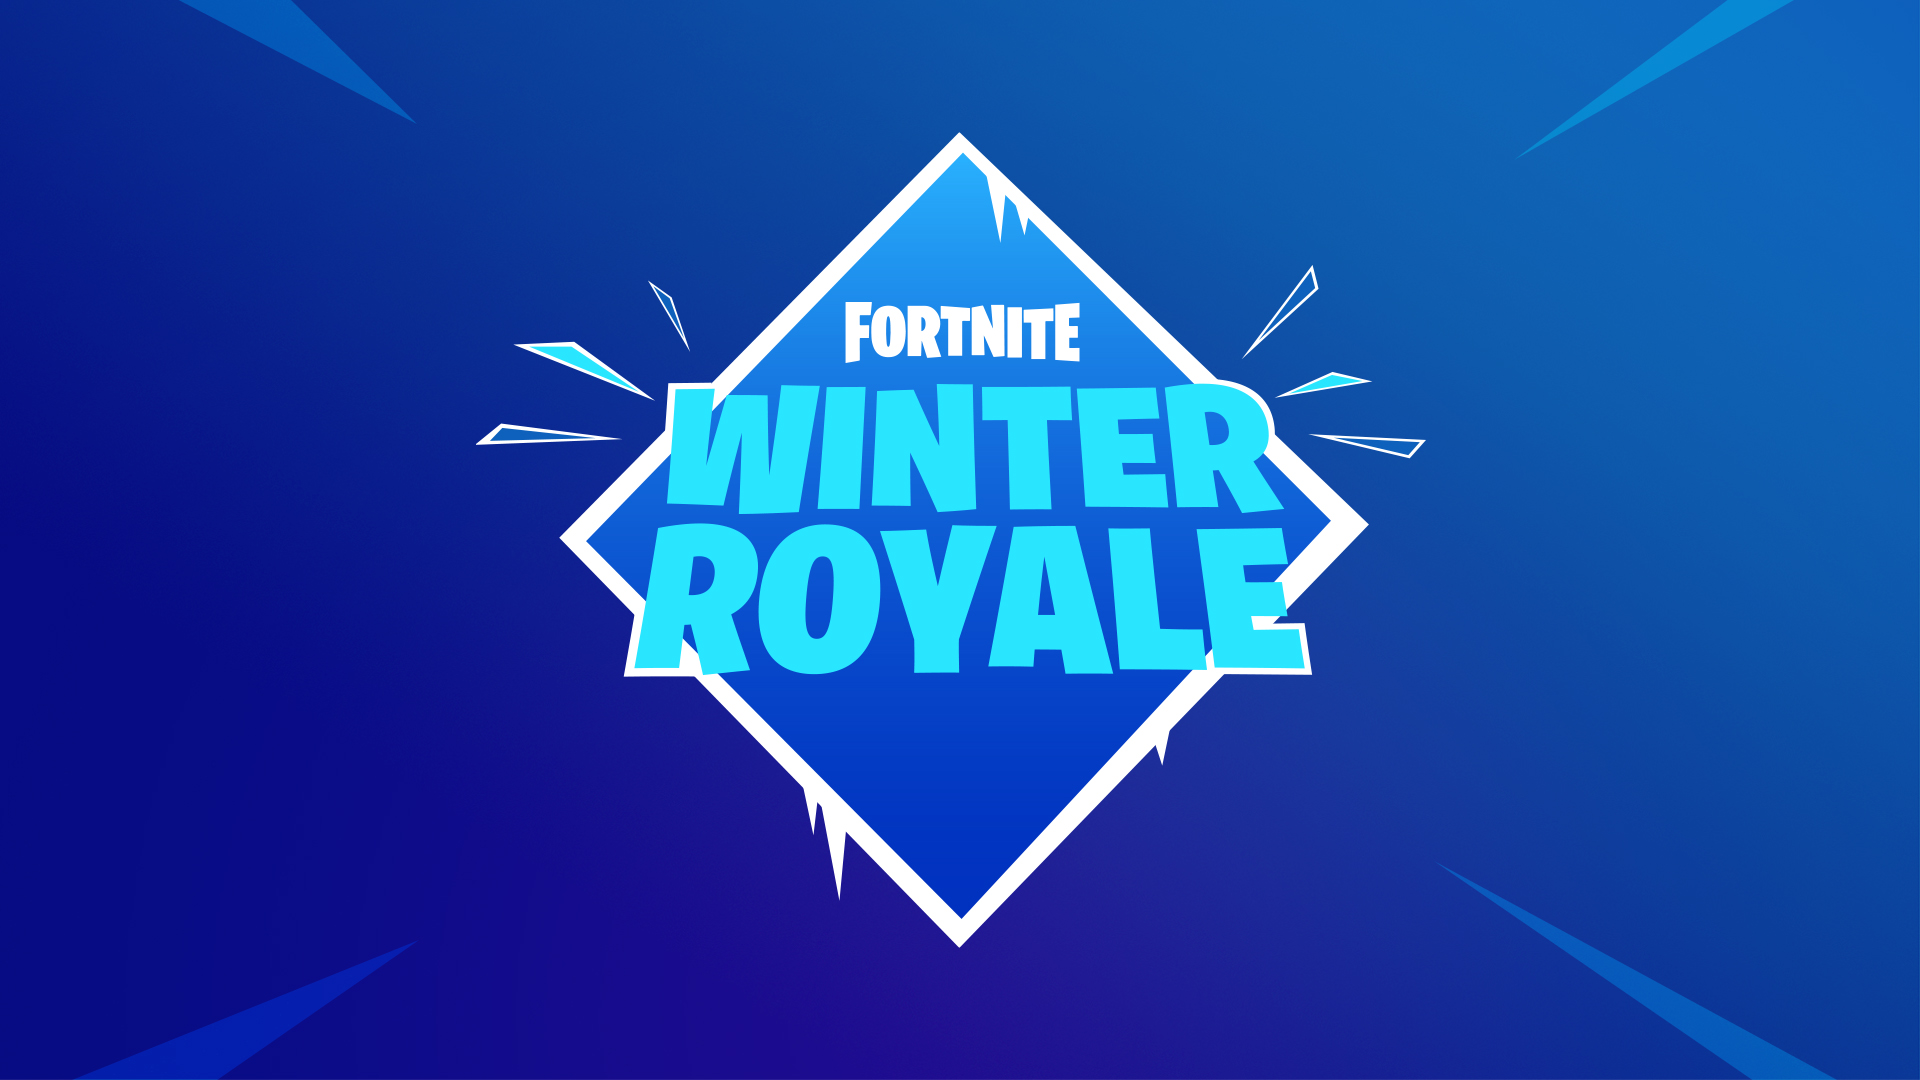 Fortnite Adds Gifting Option For A Limited Time - 